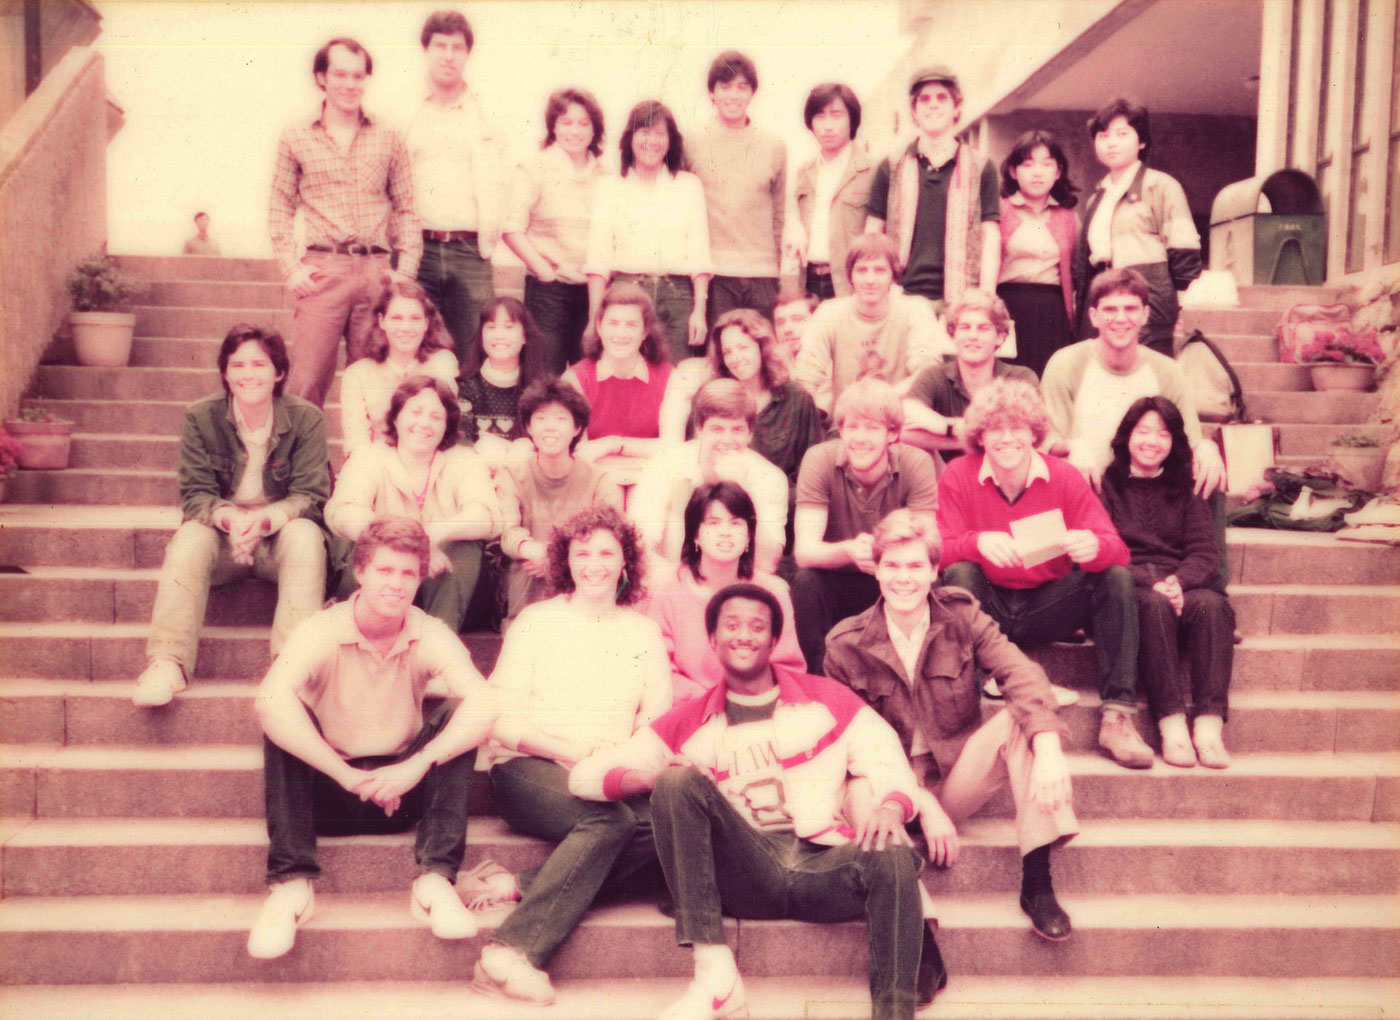 CUHK receives incoming exchange students (1987-88)